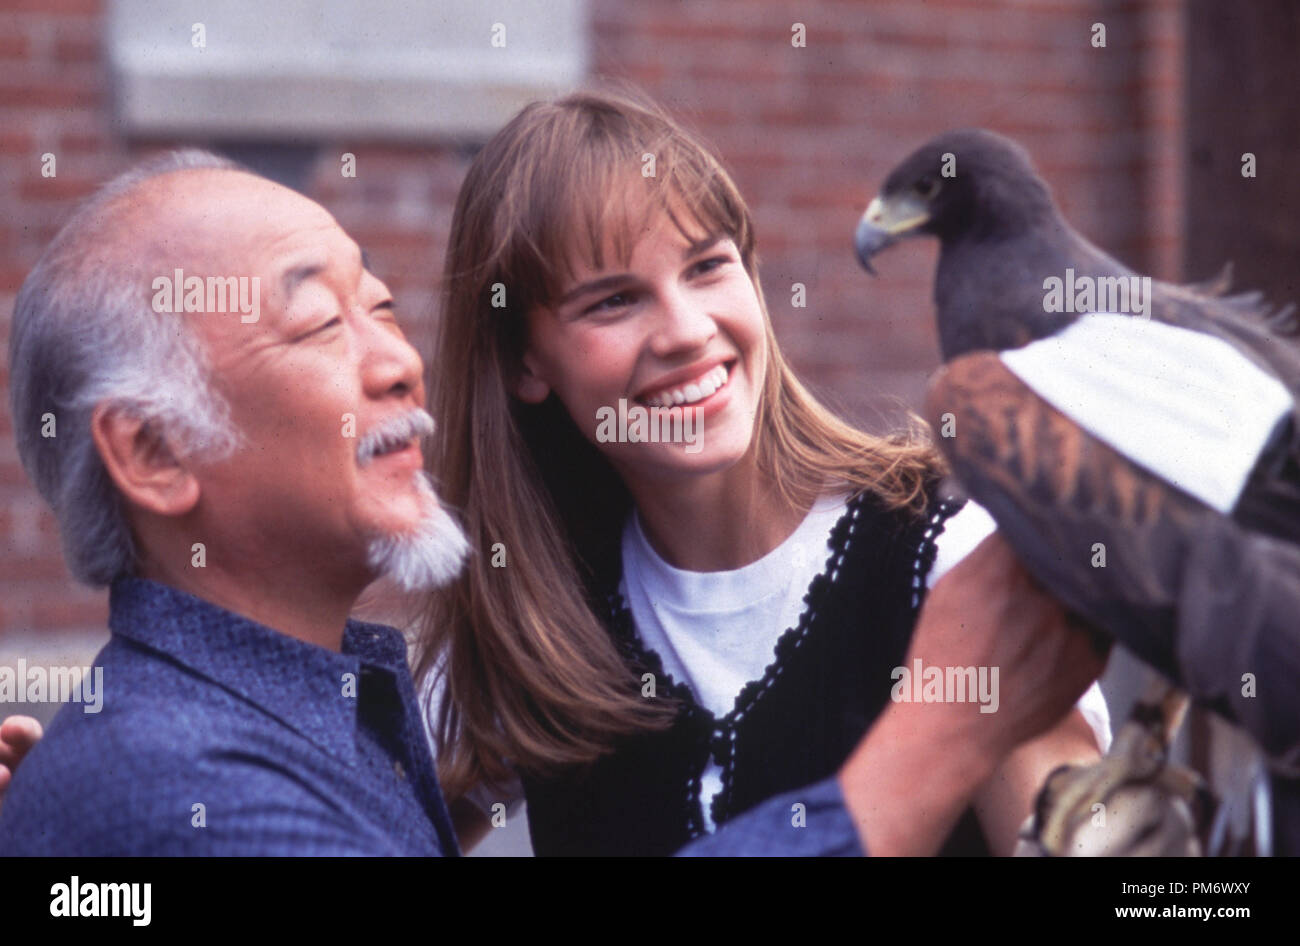 Film Still from 'The Next Karate Kid' Hilary Swank, Pat Morita 1994 Columbia Photo Credit: Phillip Caruso   File Reference # 31129053THA  For Editorial Use Only - All Rights Reserved Stock Photo